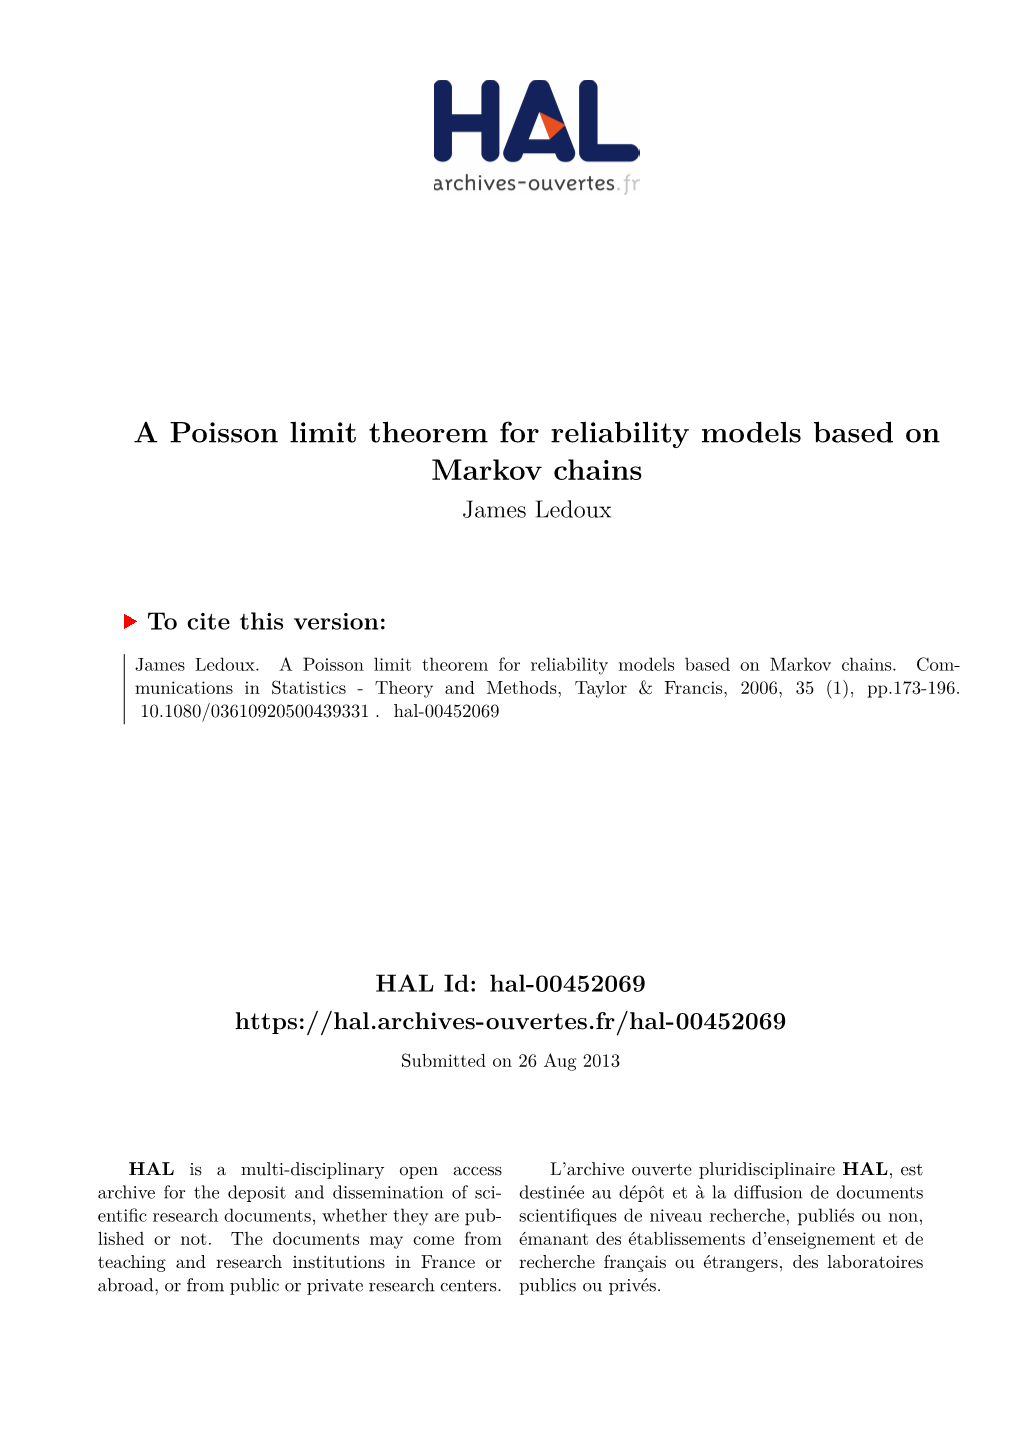 A Poisson Limit Theorem for Reliability Models Based on Markov Chains James Ledoux